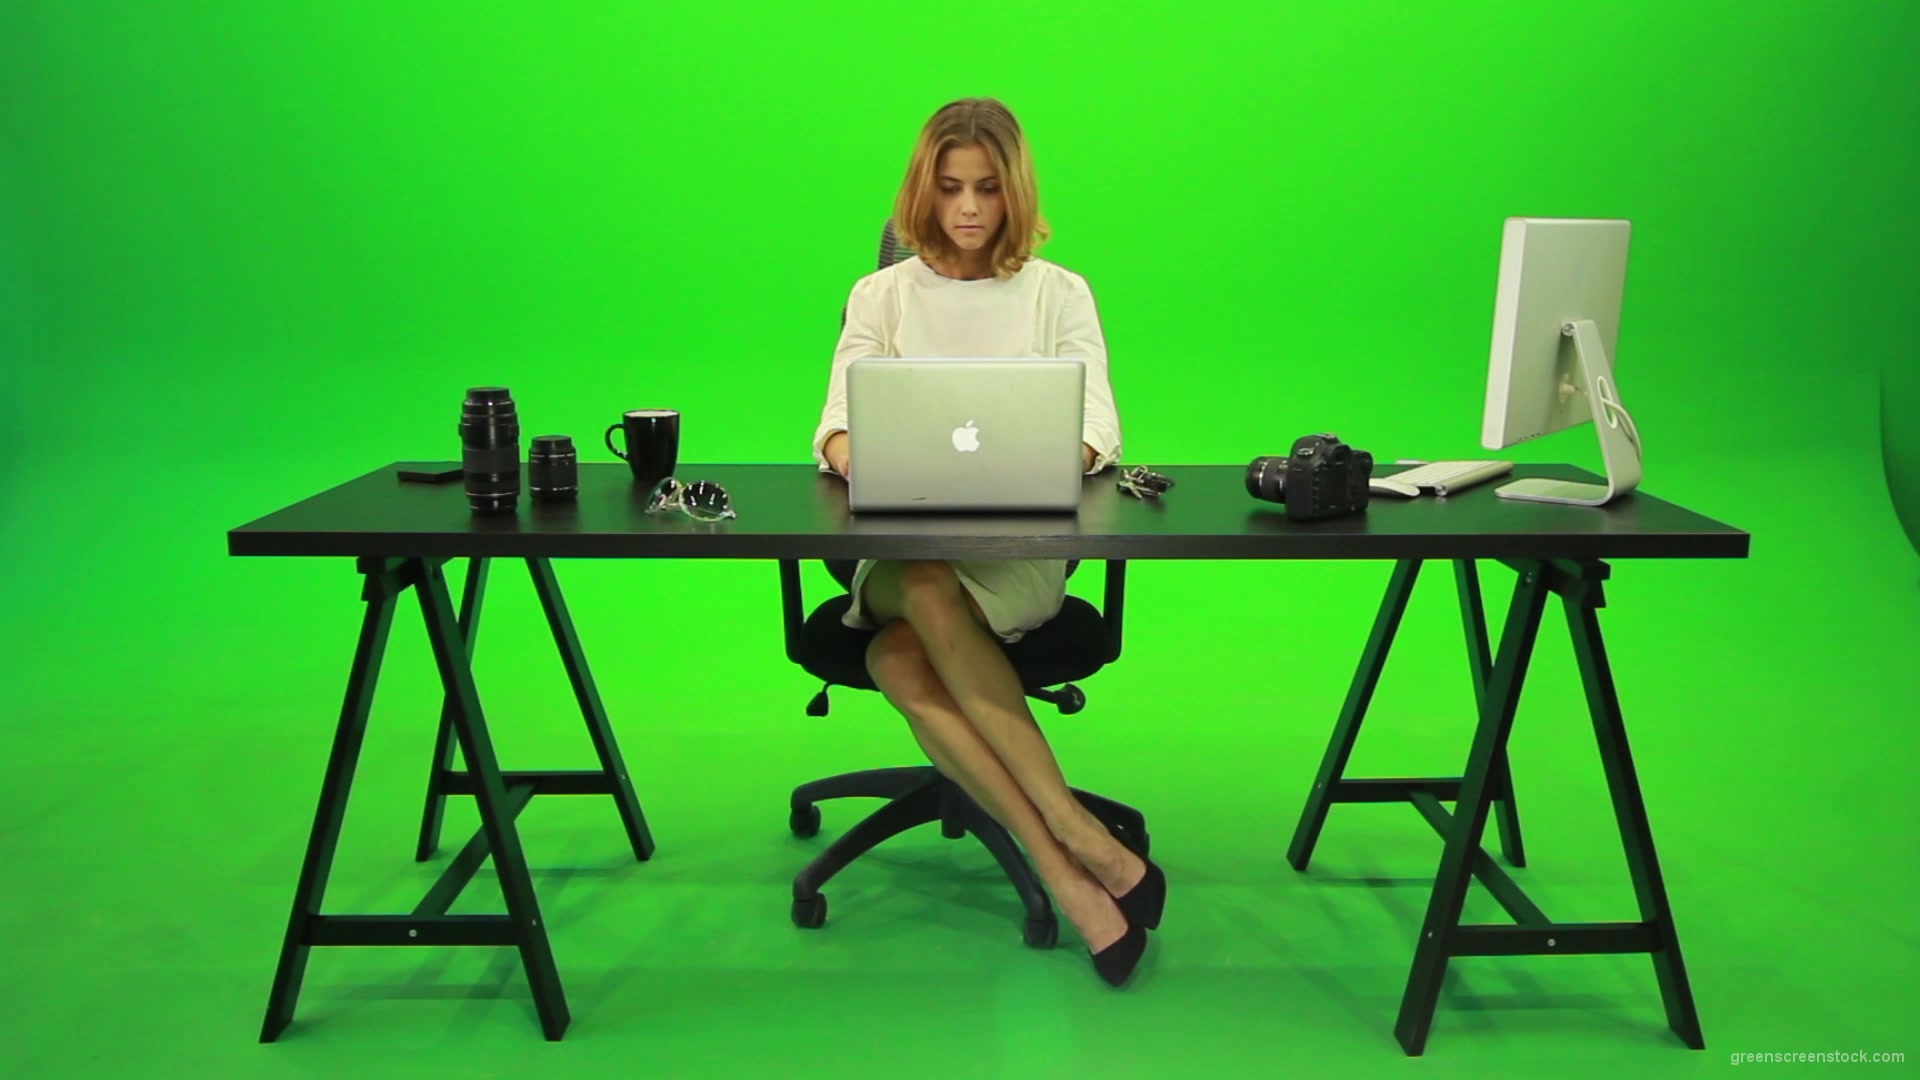 Business-Woman-Working-in-the-Office-Green-Screen-Footage_009 Green Screen Stock